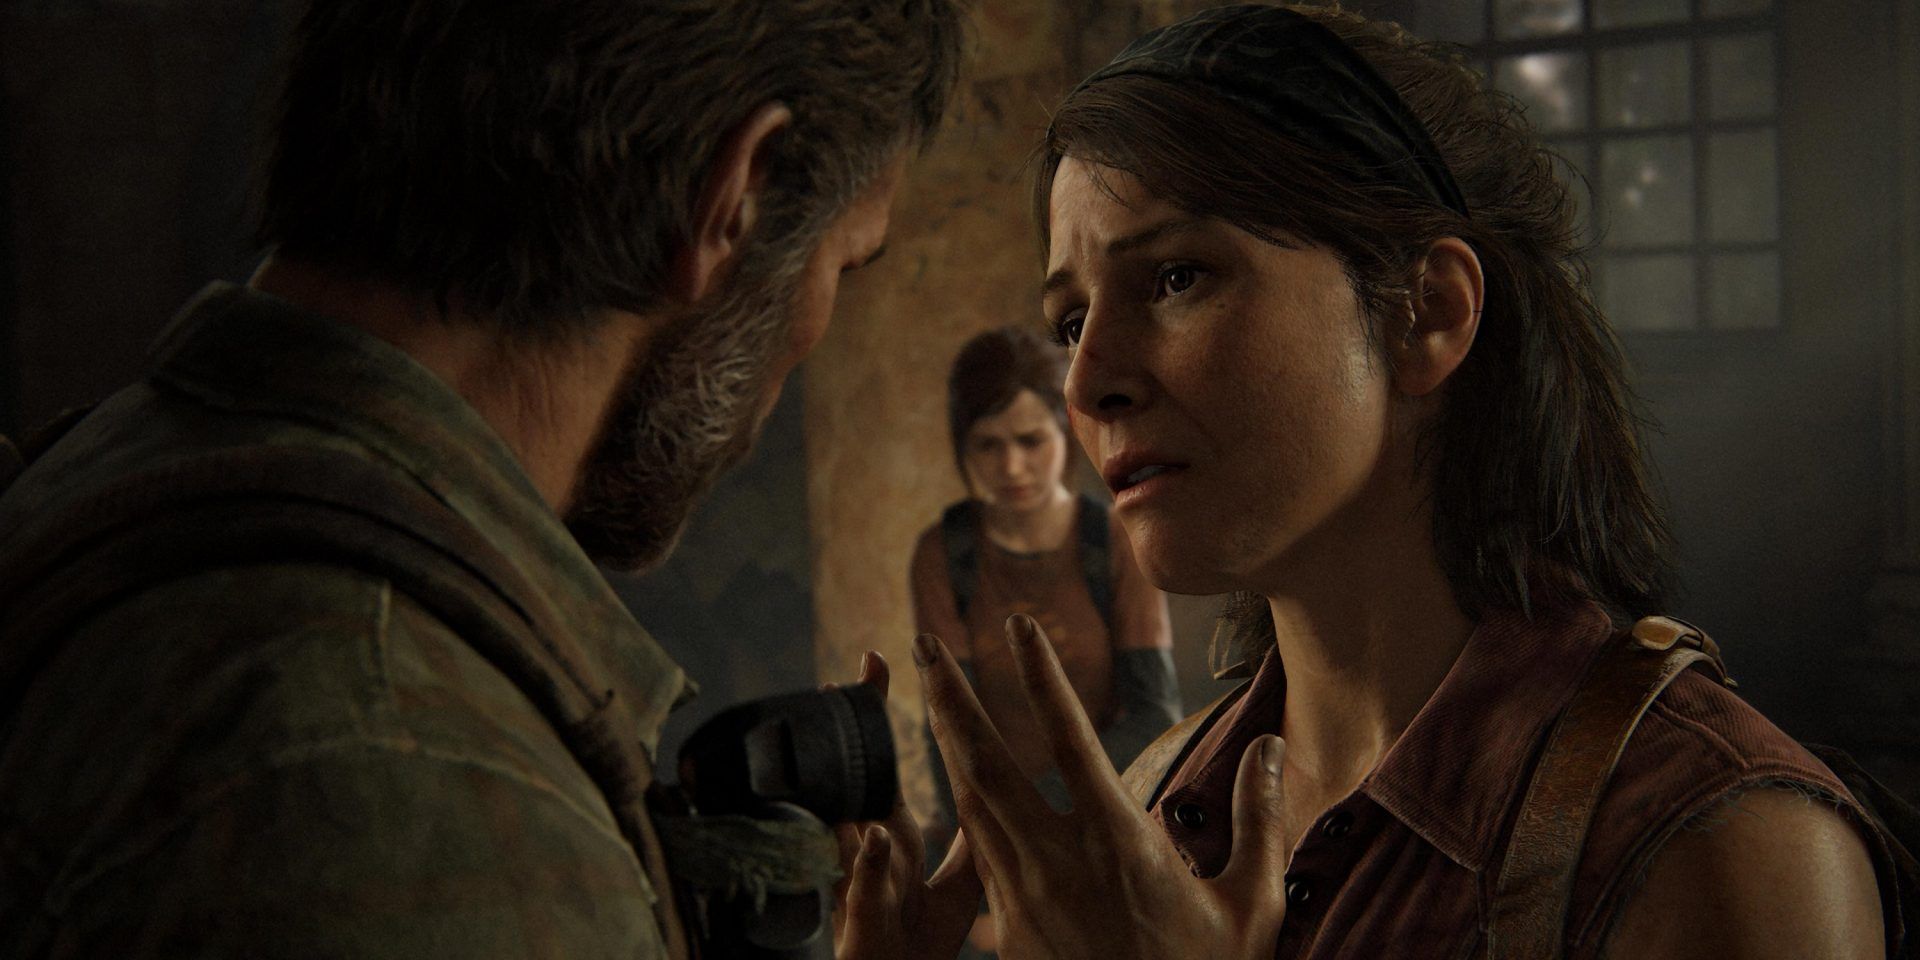 Best moments of The Last of Us: The 6 most memorable